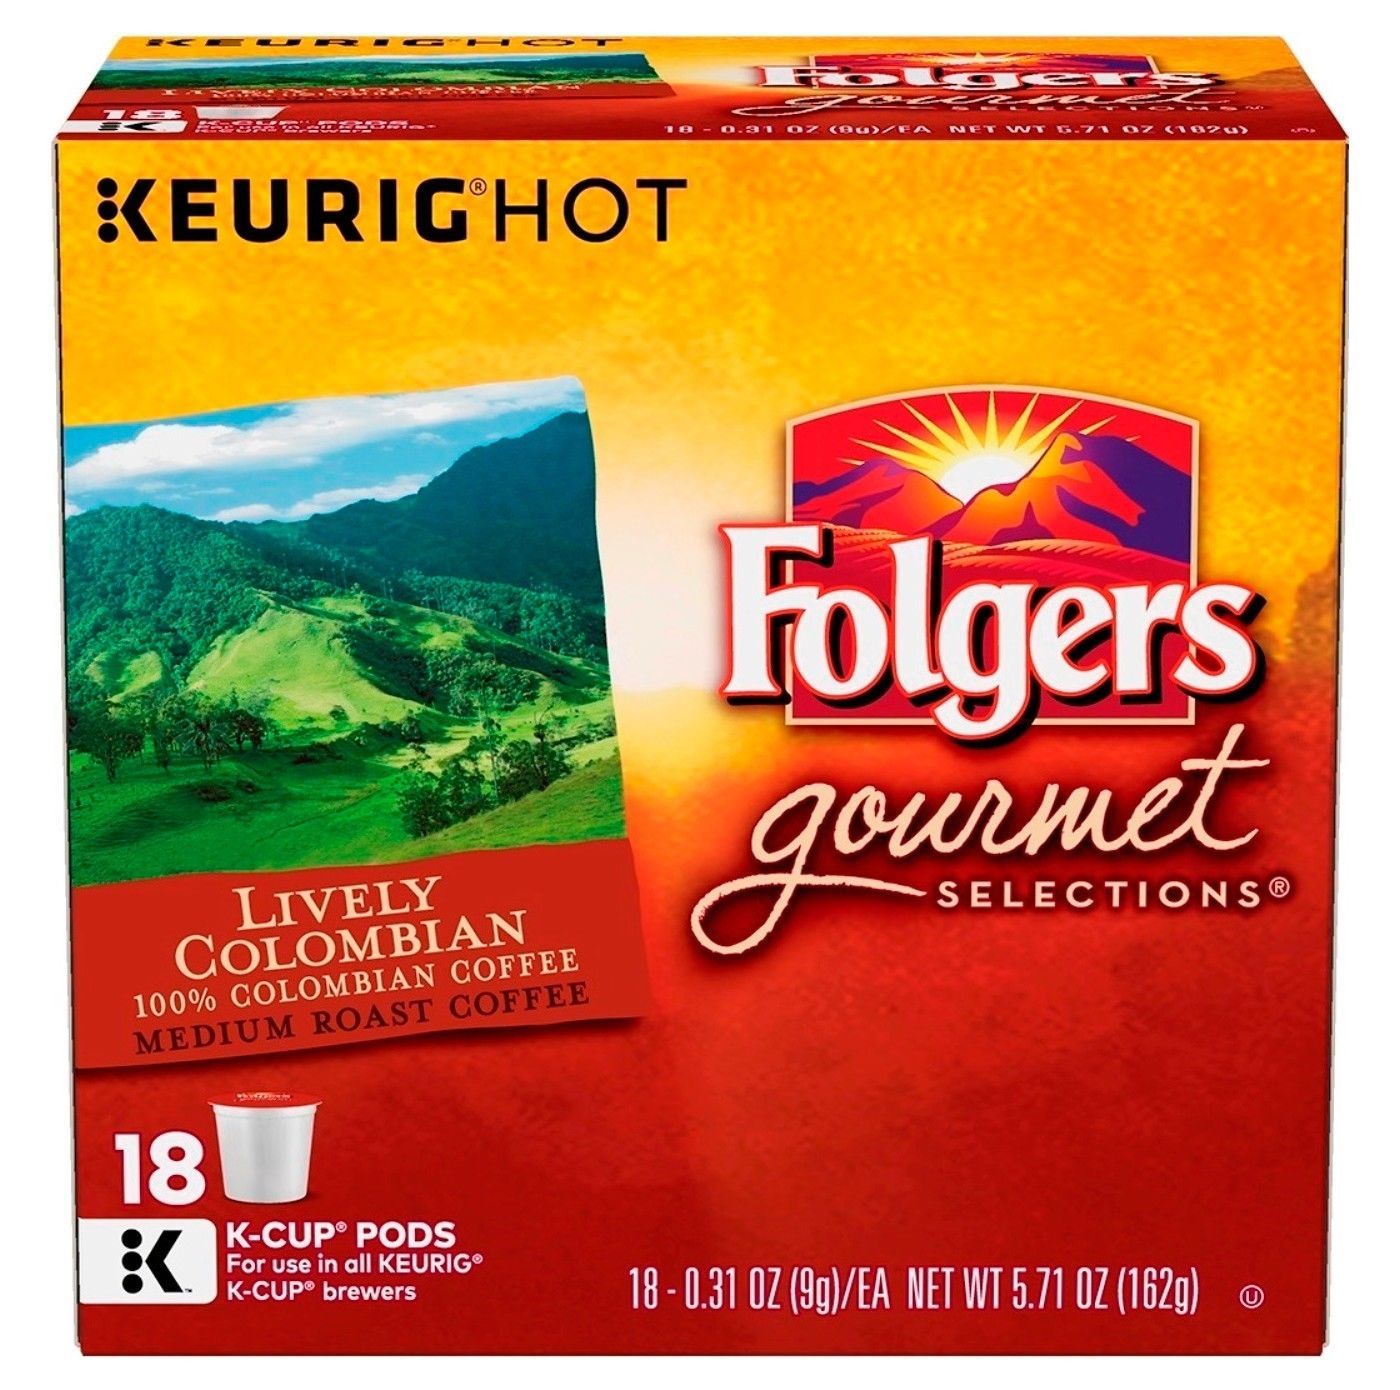 Folgers 100% Colombian Coffee 18 to 144 Keurig K cups Pick Any Quantity - $21.89 - $104.88